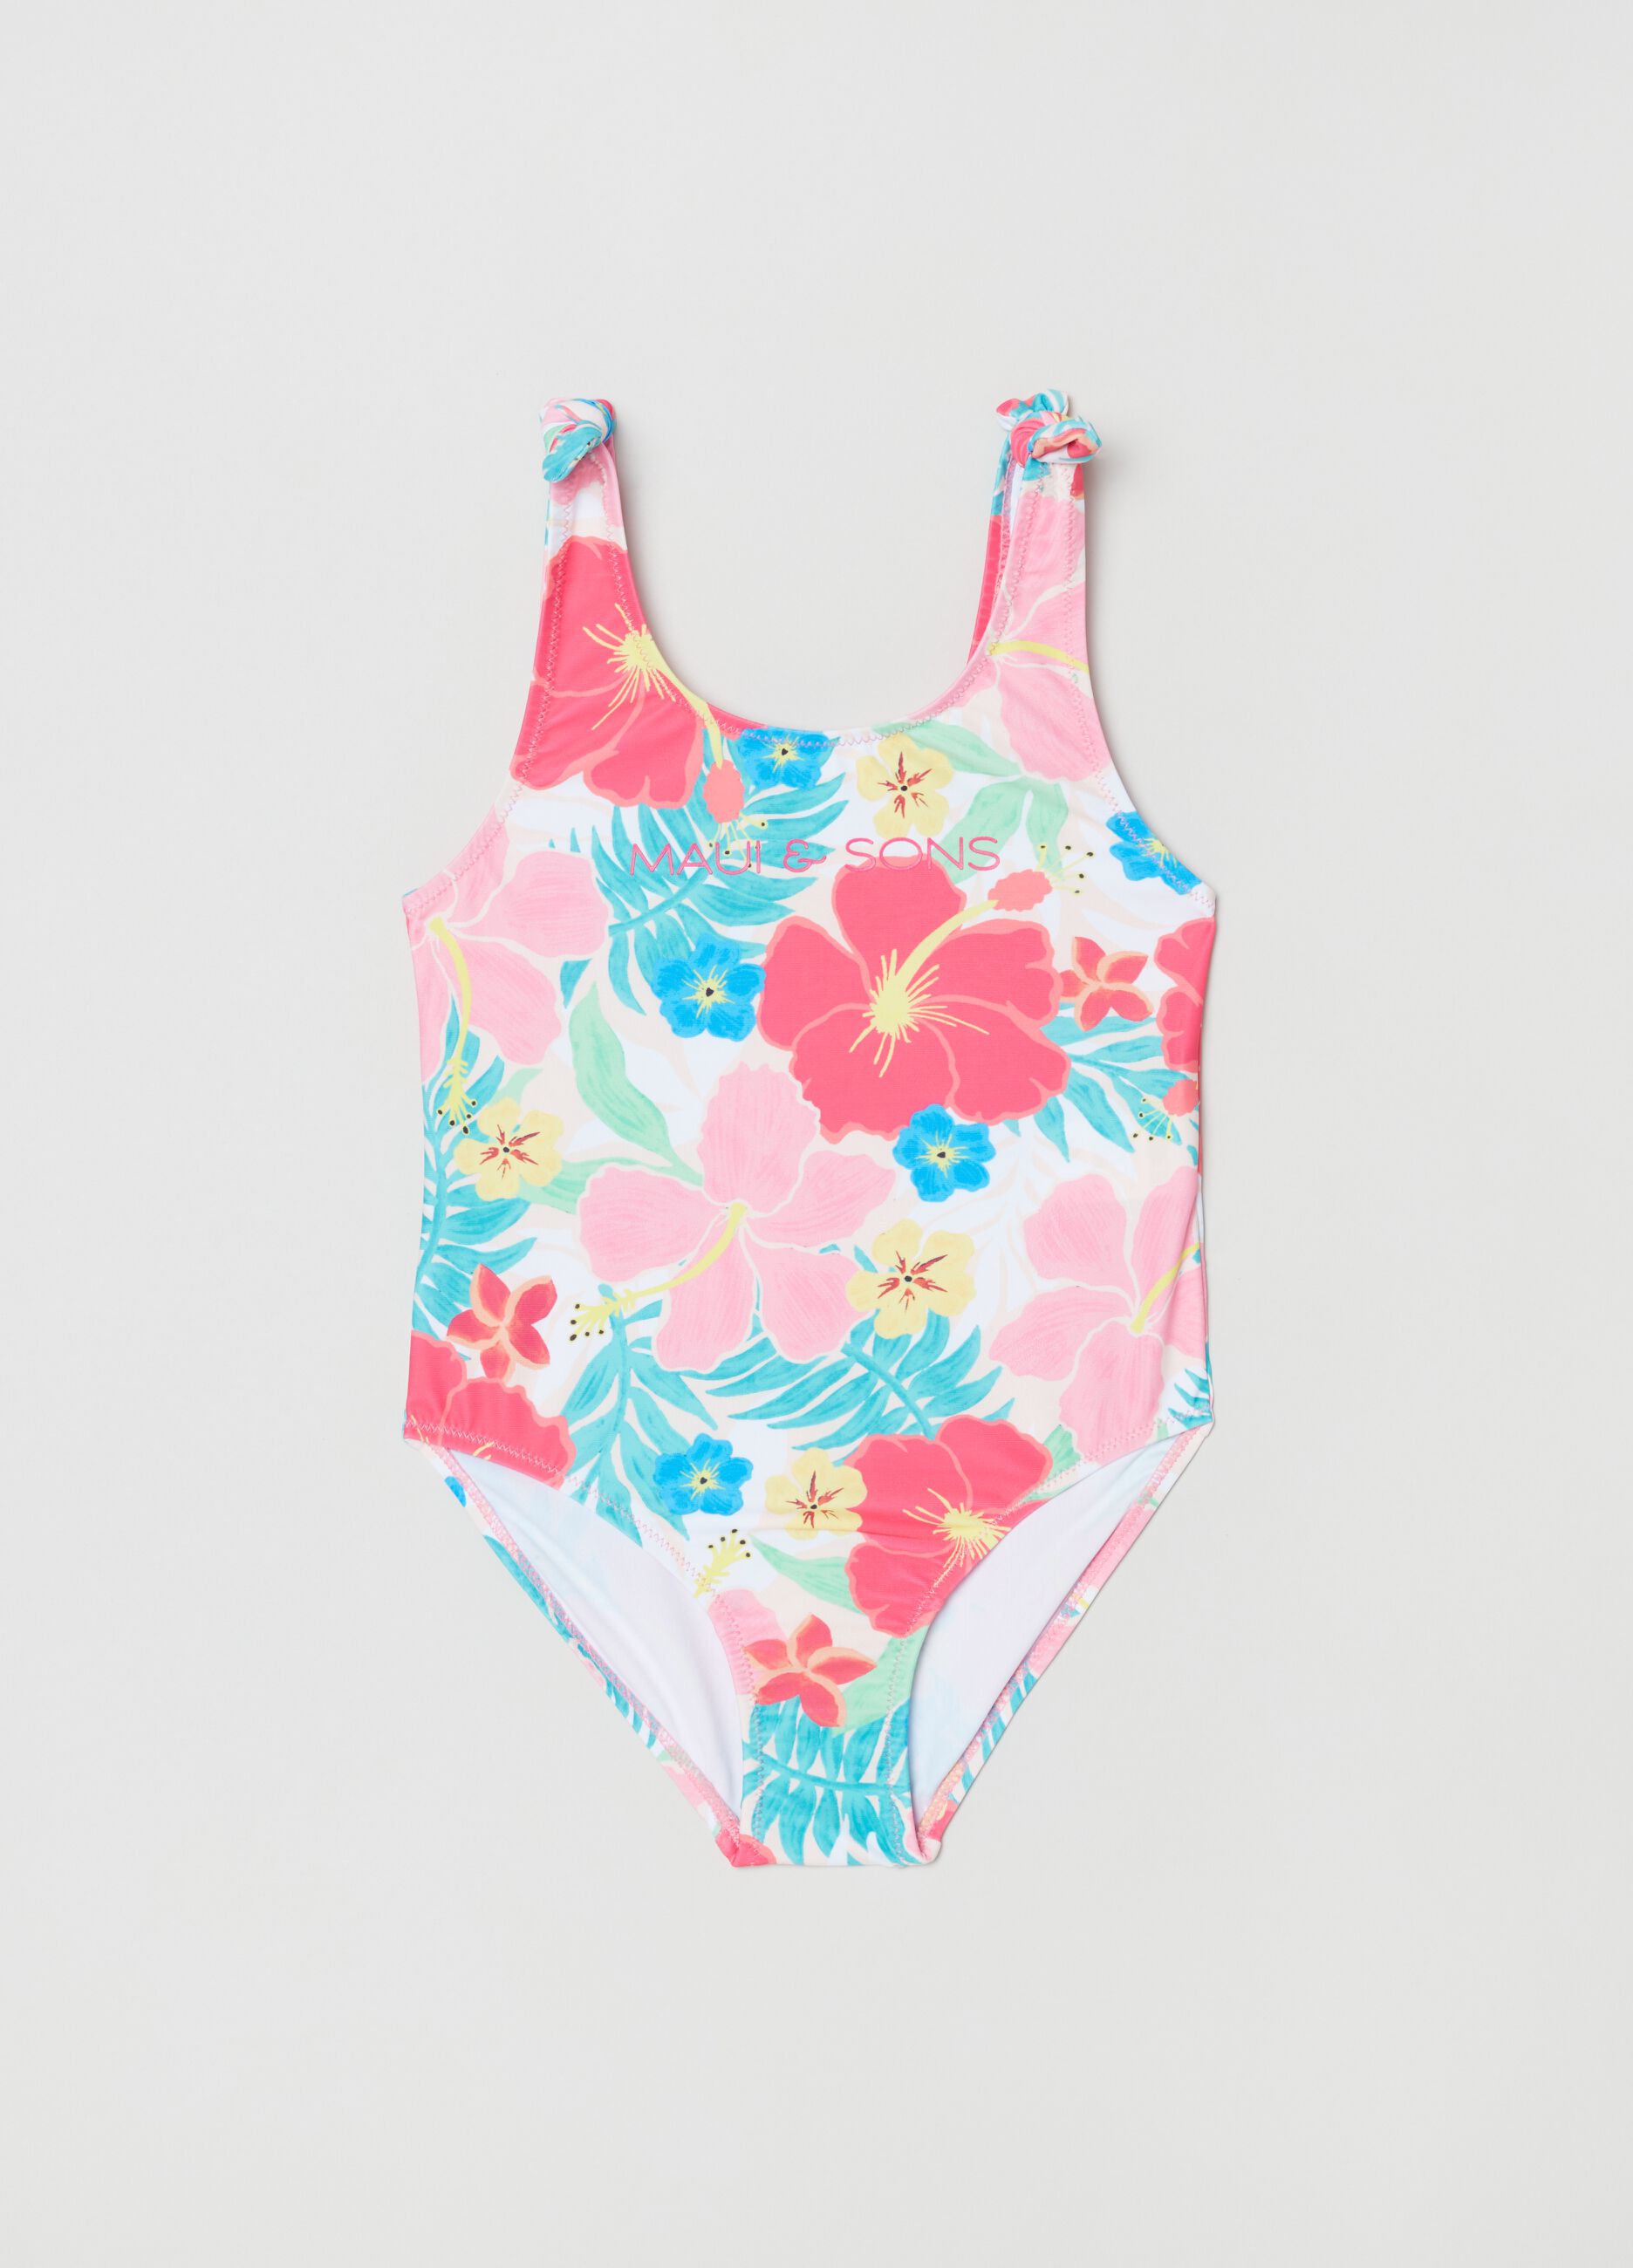 One-piece floral swimsuit by Maui and Sons